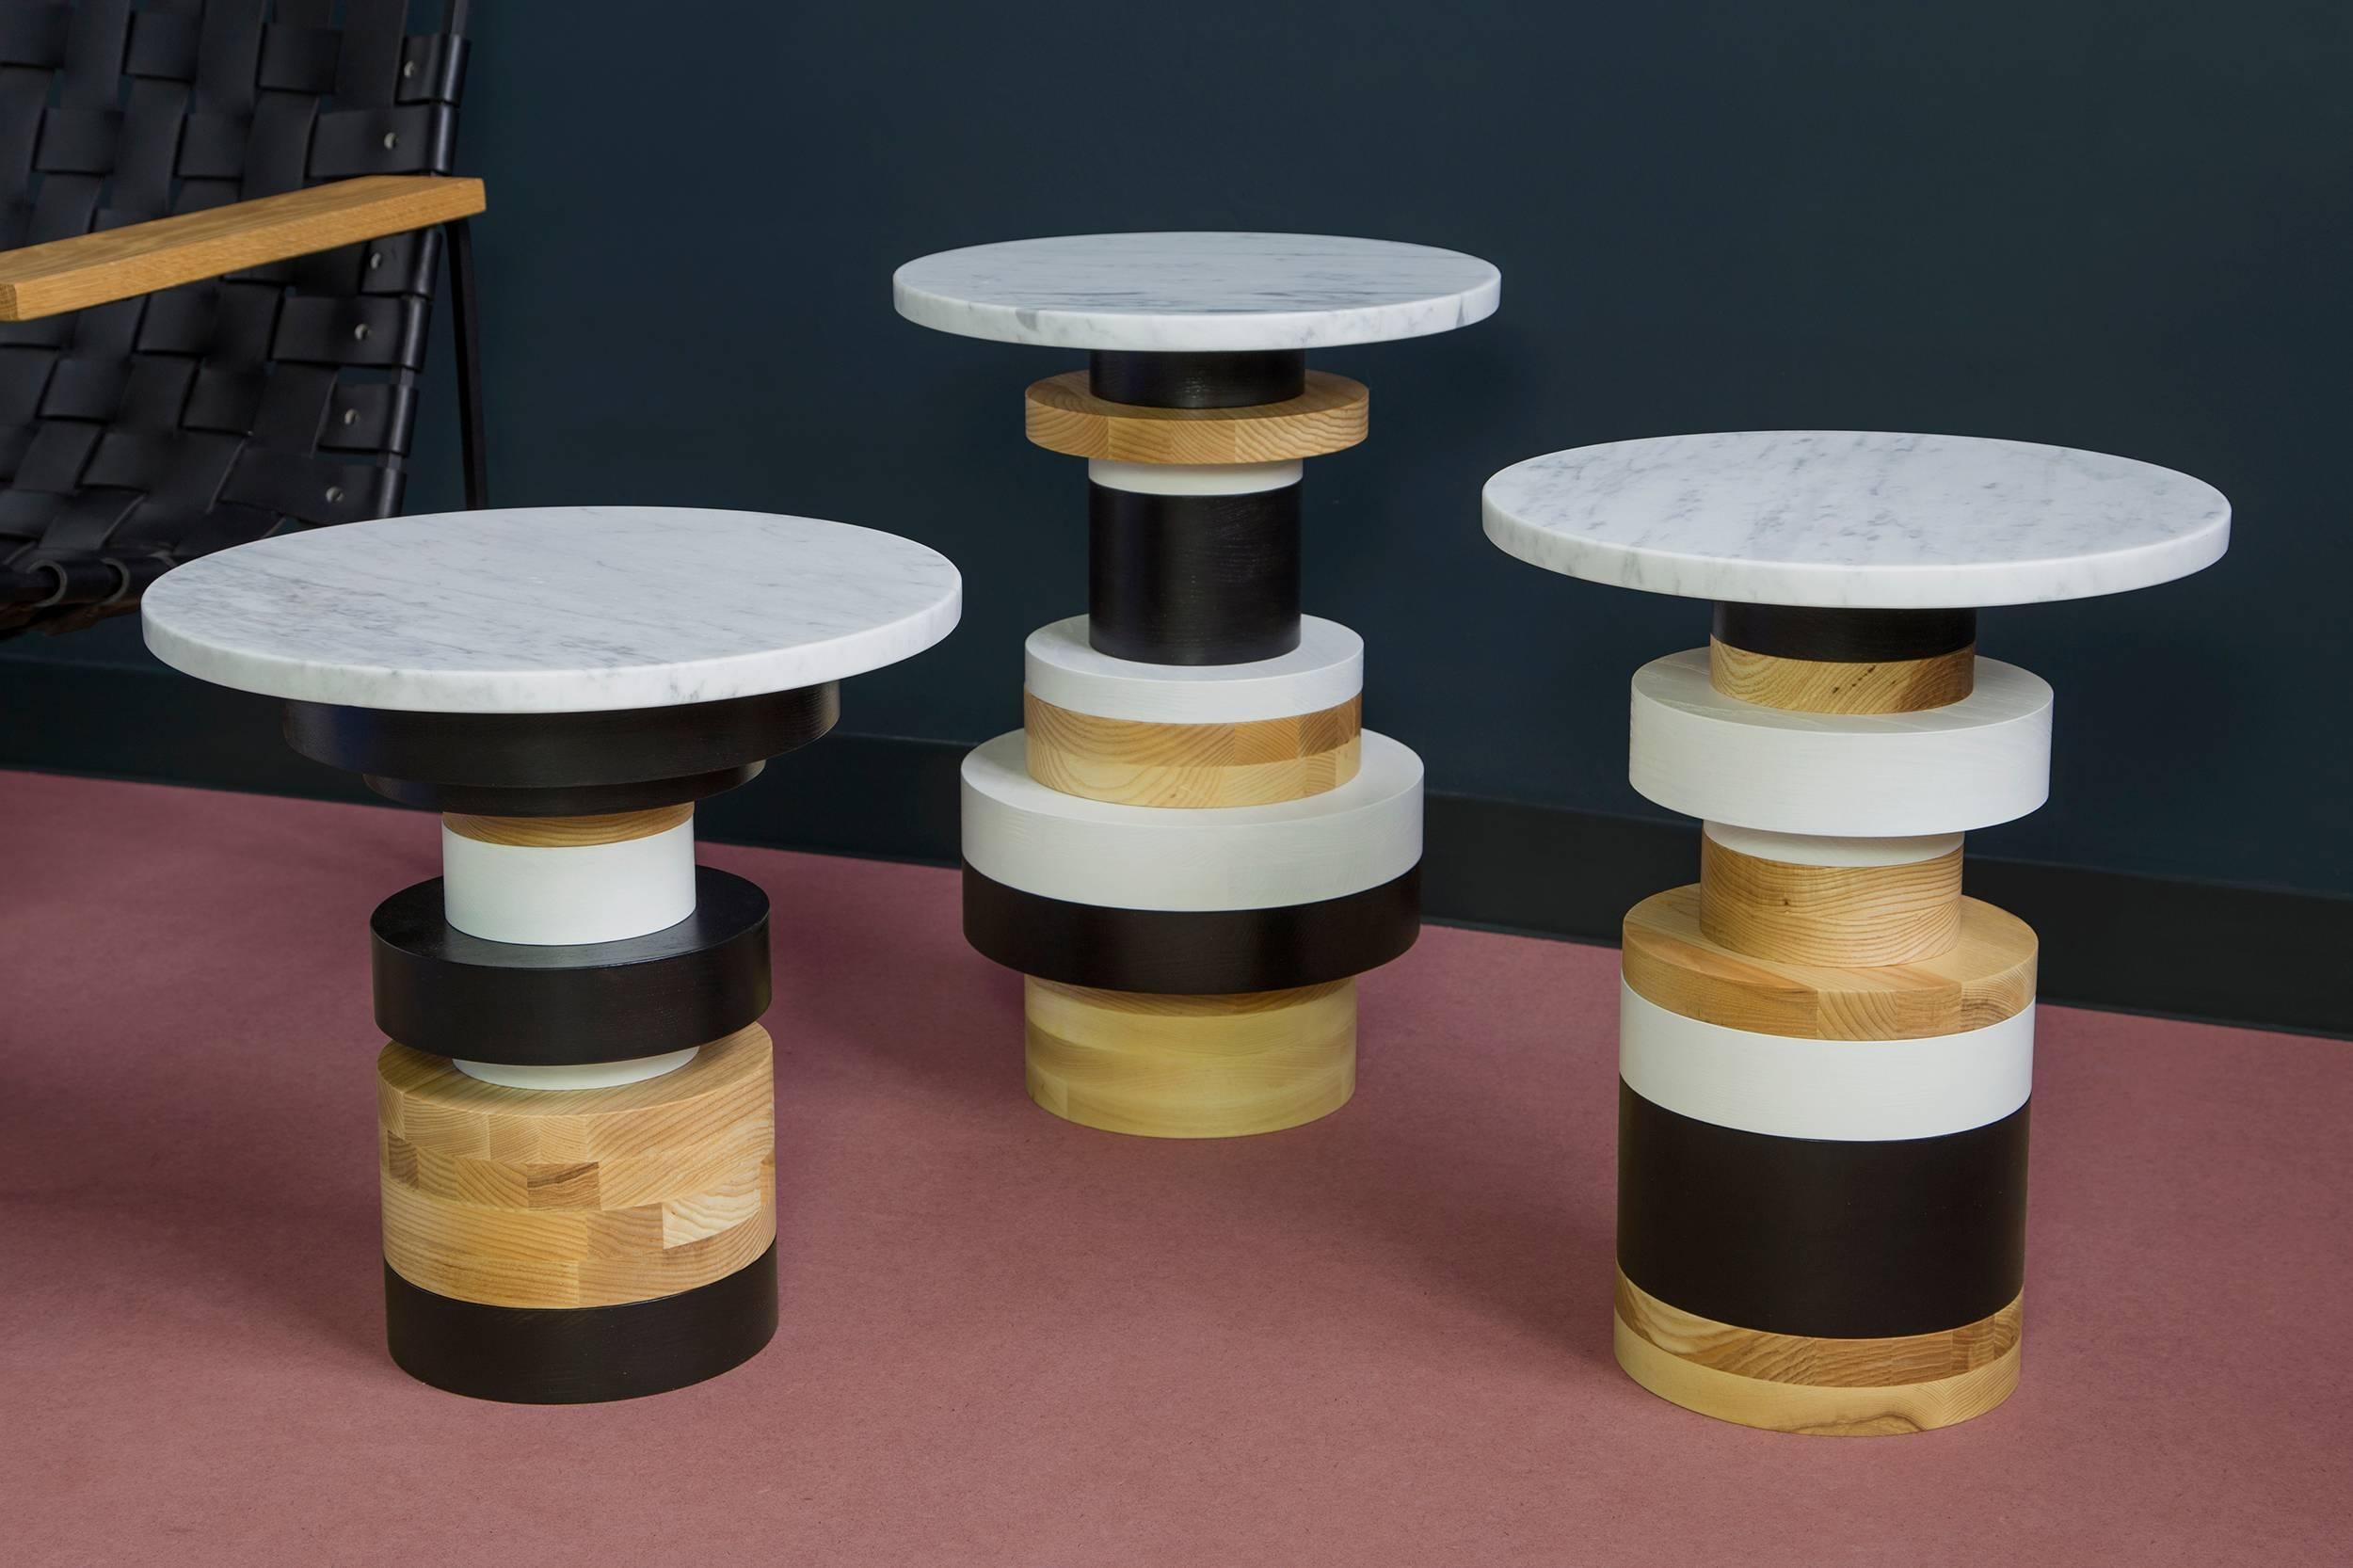 The Sottsass-inspired “Sass Tables” are simple, sculptural accents for any interior space. Made from stacked wooden bases and a honed marble top, Sass tables are perfect individually or clustered. Measures: 20 inches tall with 18 inch marble top.